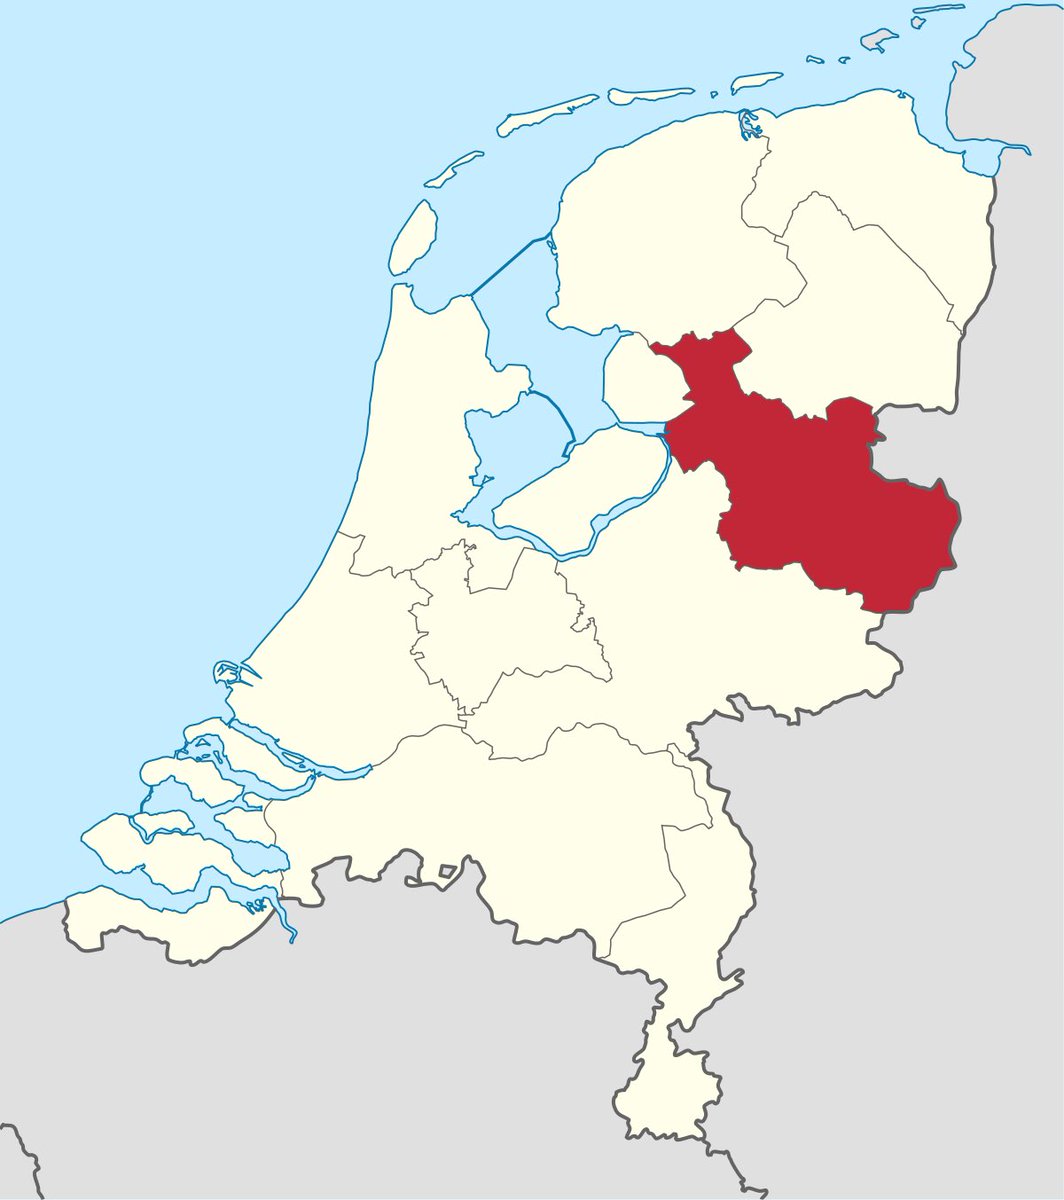 10. Overijssel  * You hear nothing about this province, ever. Something is up.  * All the religious crazy cults are here, literally all of them.  * I bet the average body secretly hidden in a house per household is 3.  * Literally doesn’t exist.